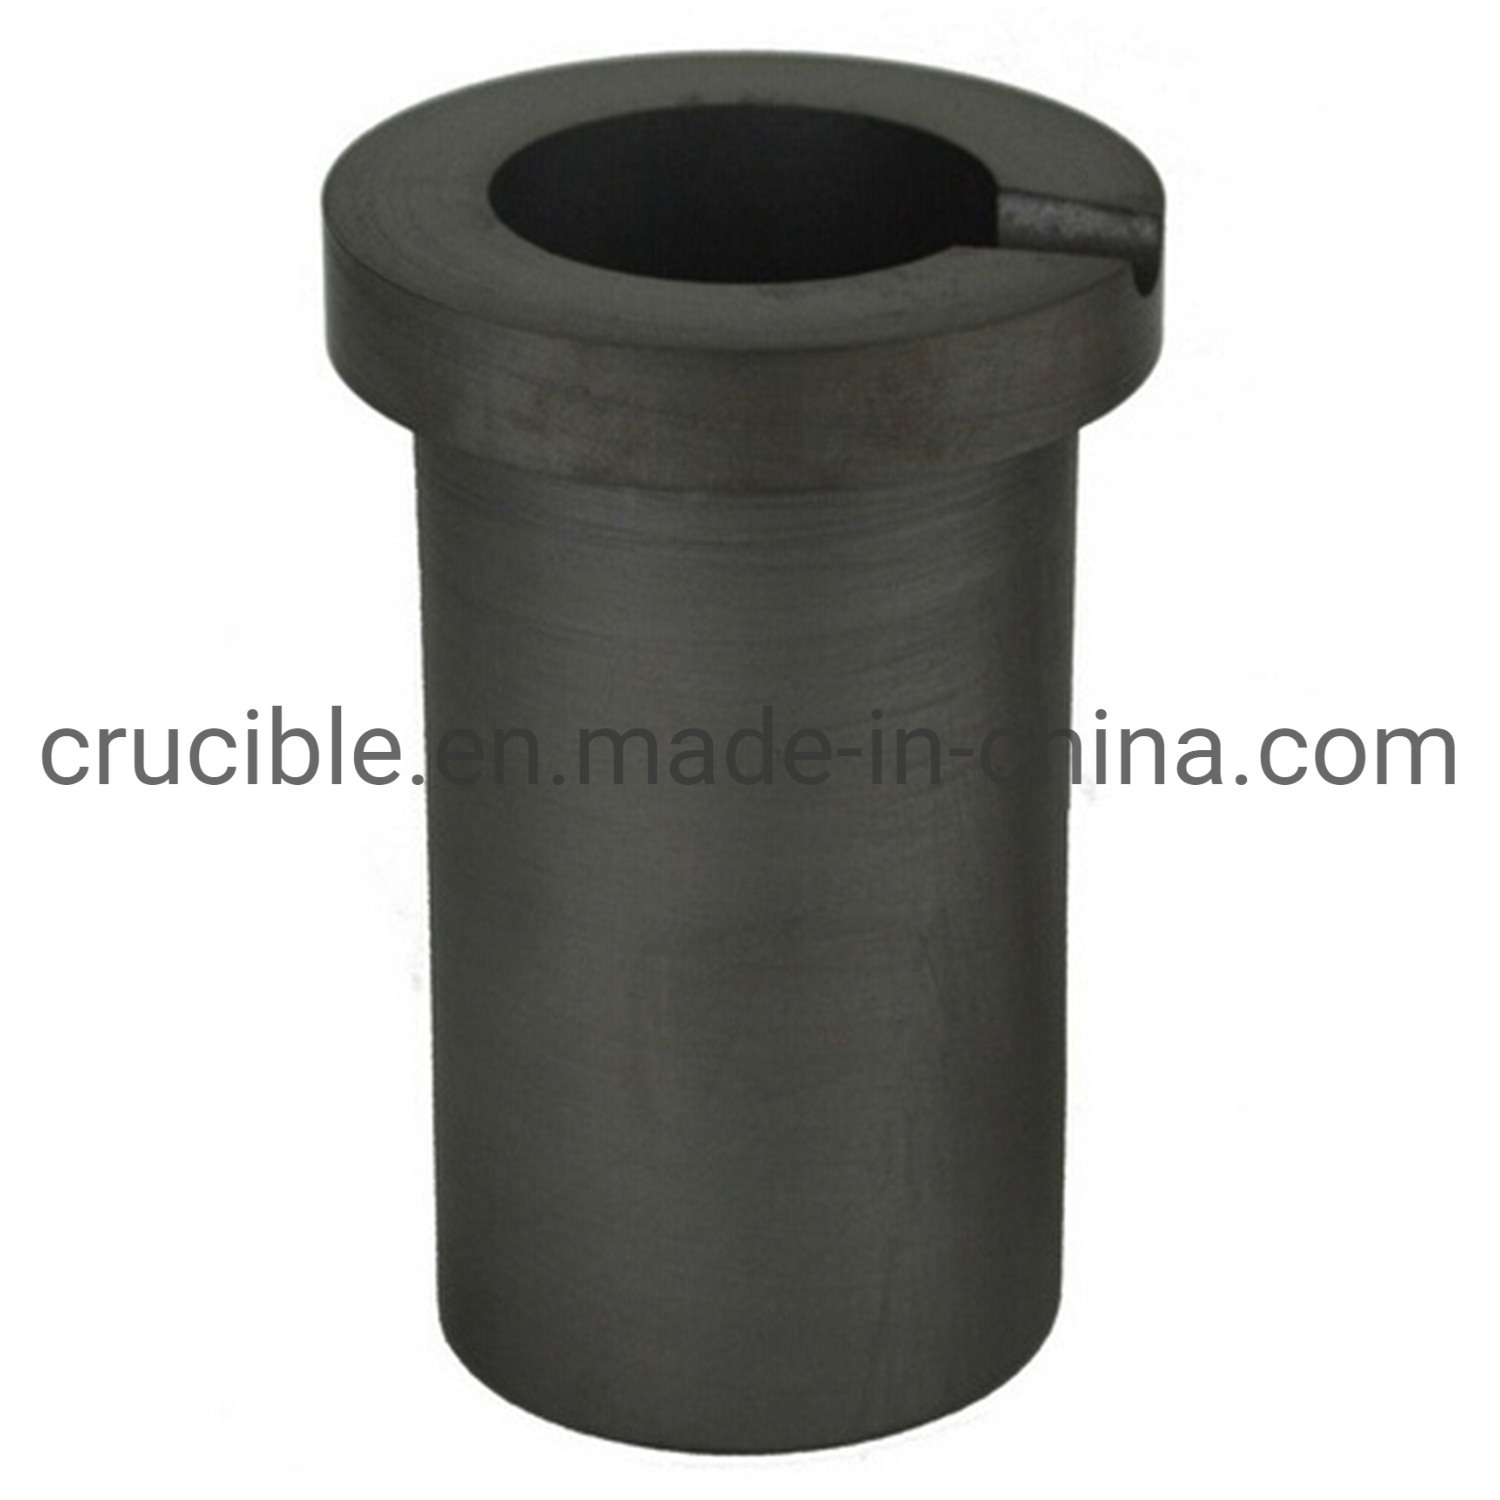 Vaorwne High Purity Graphite Melting Crucible Casting with Lid Cover 4040mm for Silver&Black 